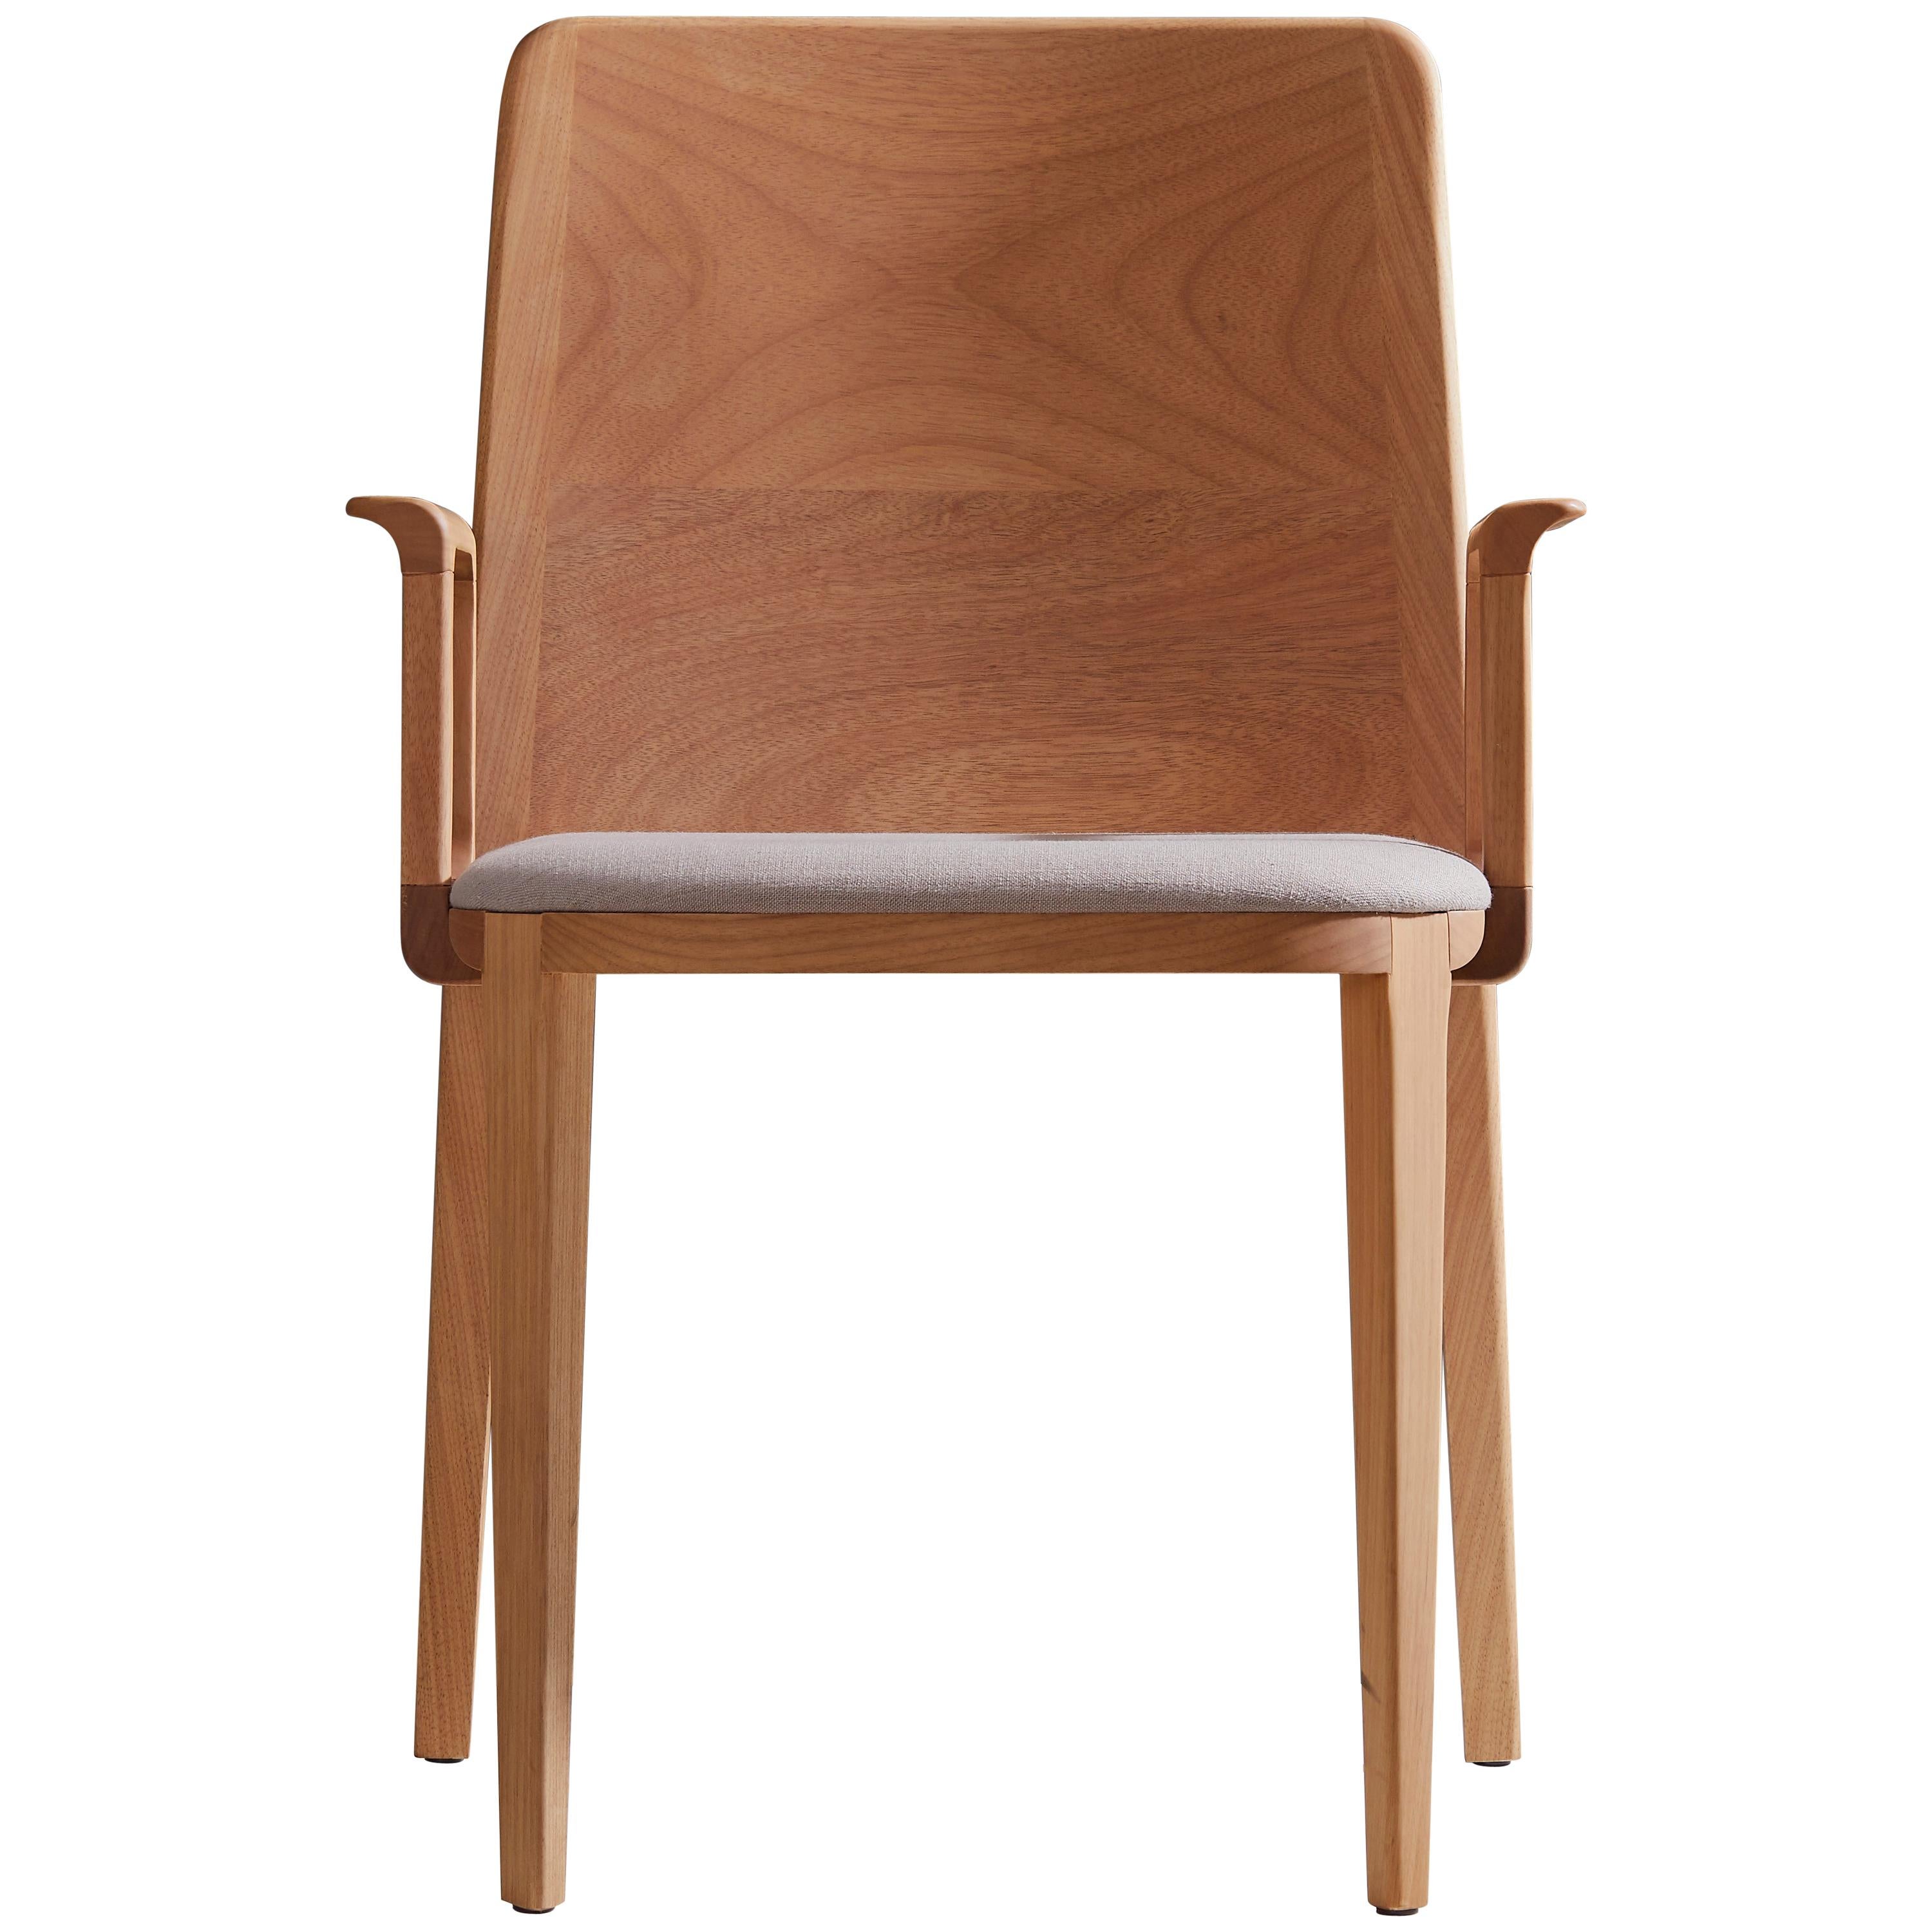 Minimal Style, Solid Wood Chair, Textile Seating, Solid Backboard, with Arms